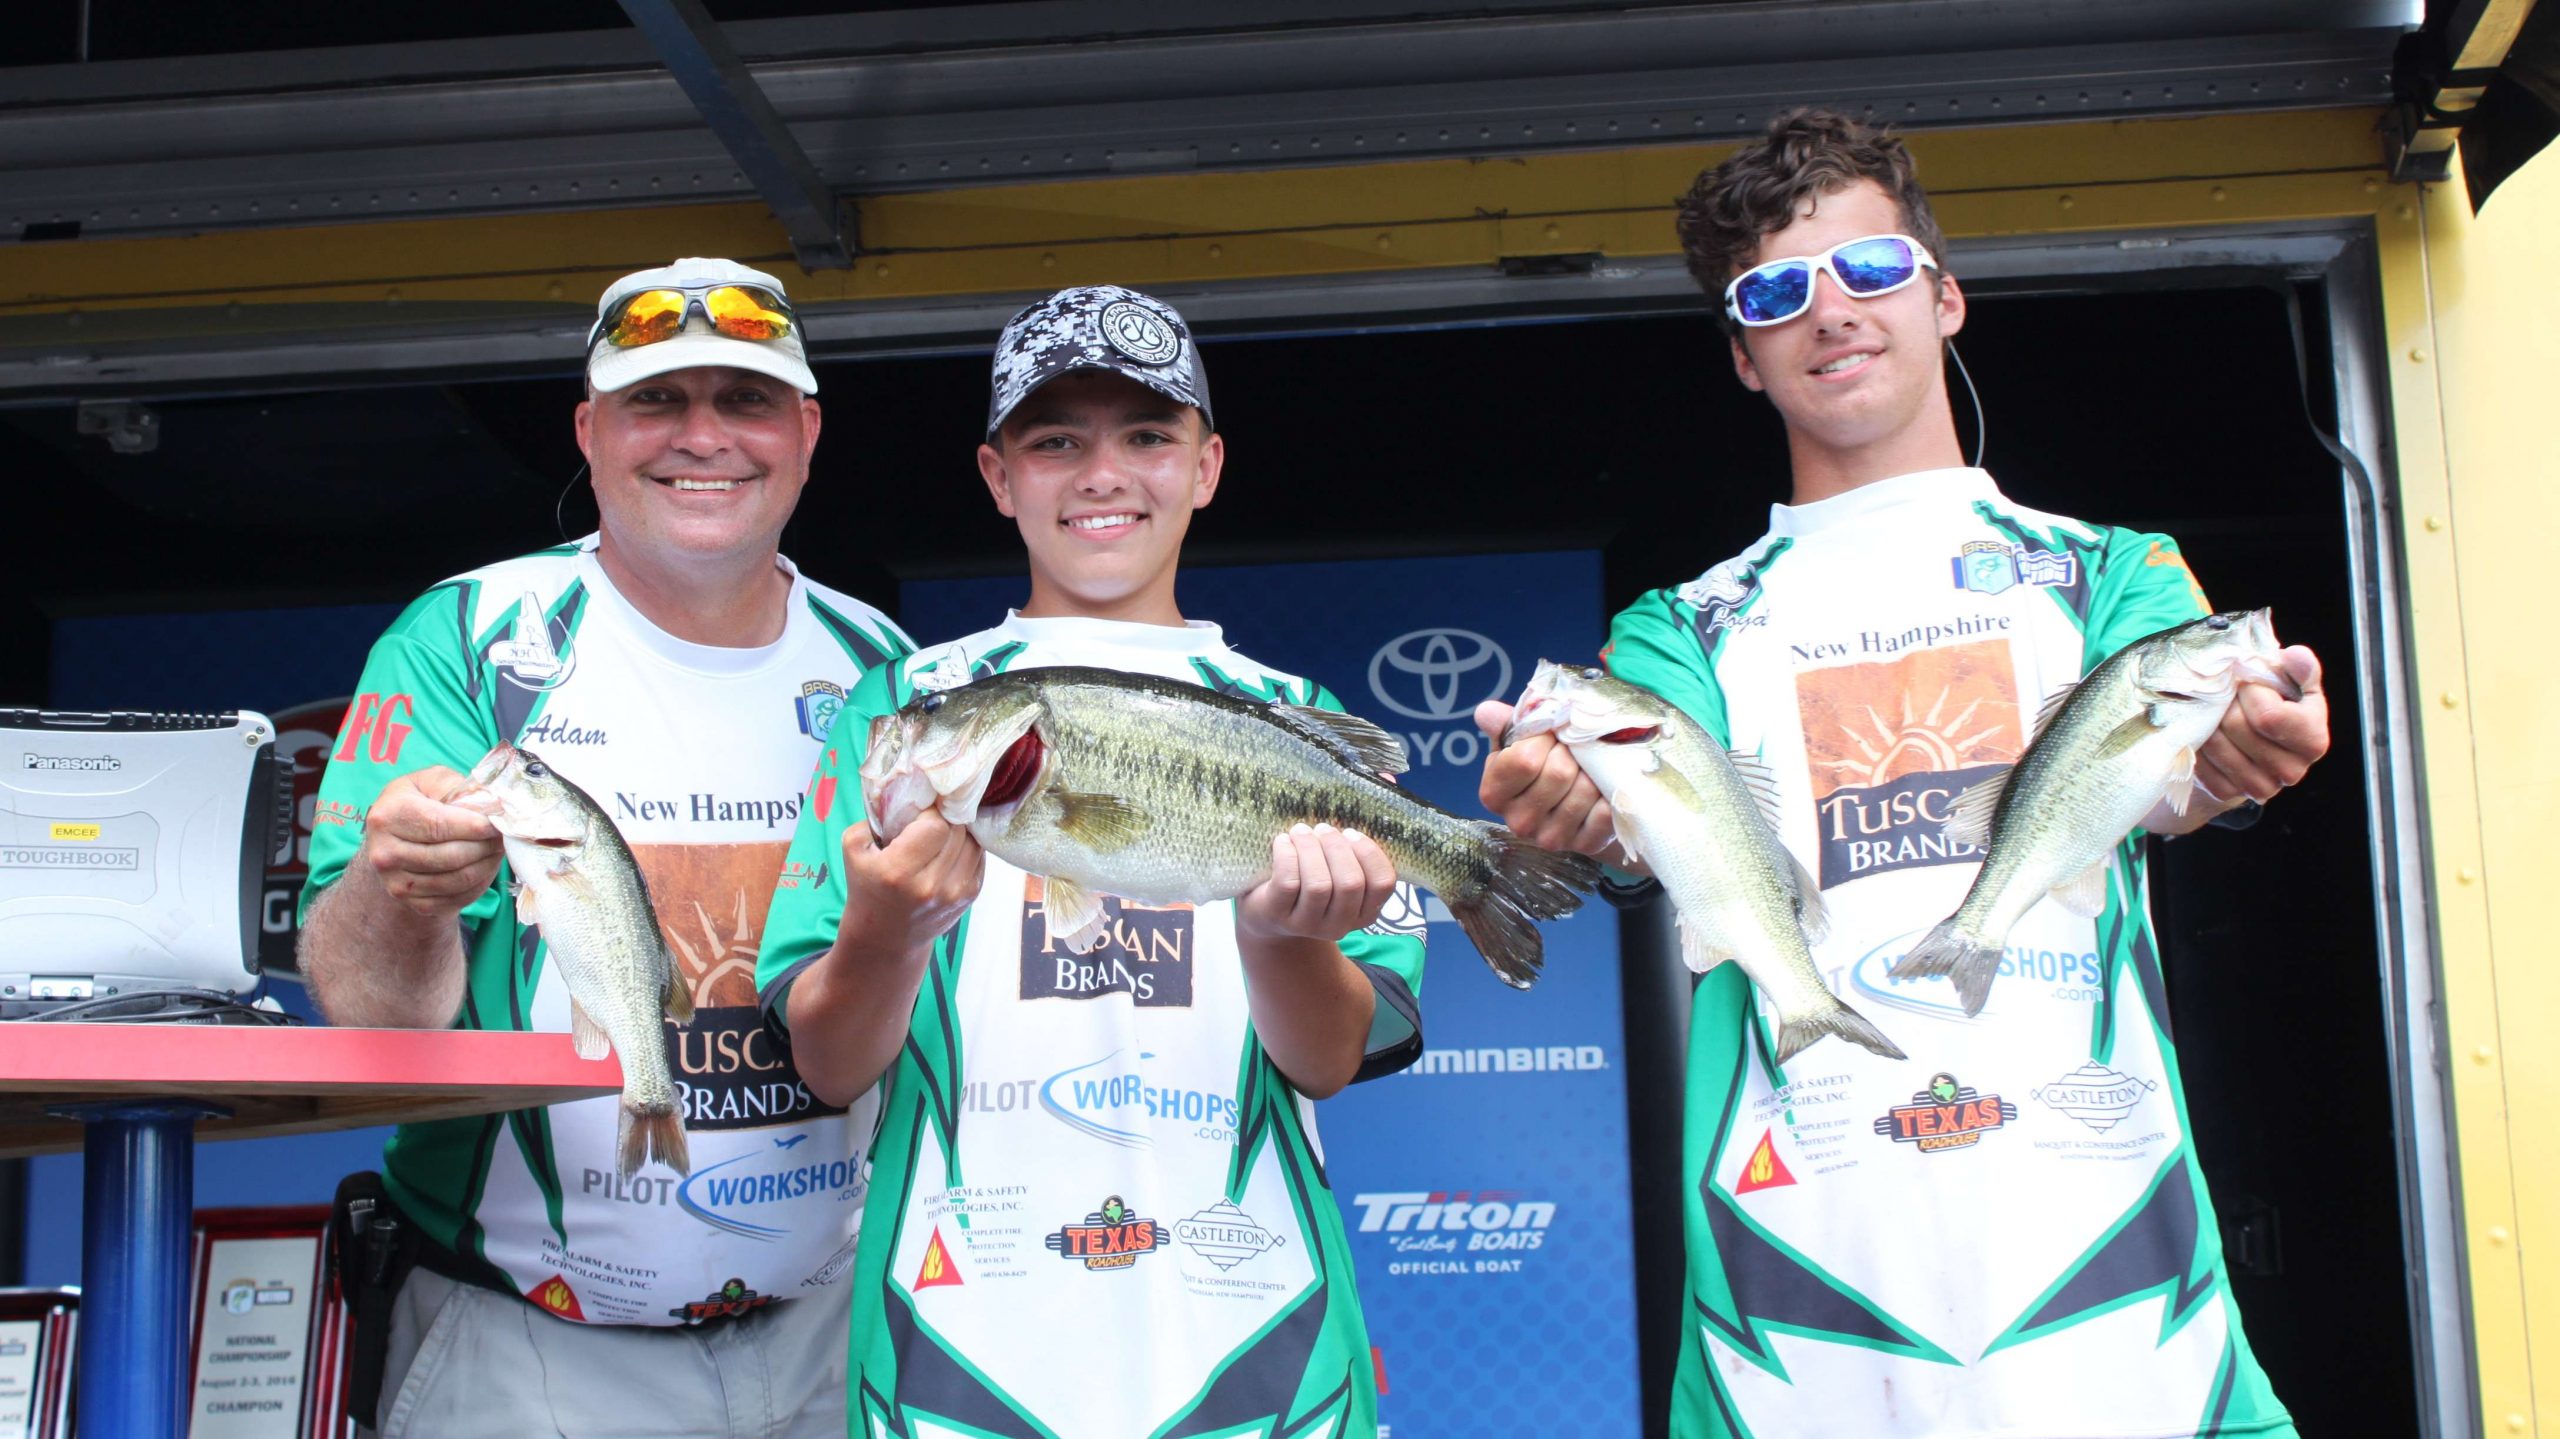 New Hampshire coach Adam Daniels, and anglers Jack Armstrong and Logan Daniels show the haul that helped the team to a second-place finish. Their catch of 7-14 on Day 2 gave them a two-day total of 15-13.